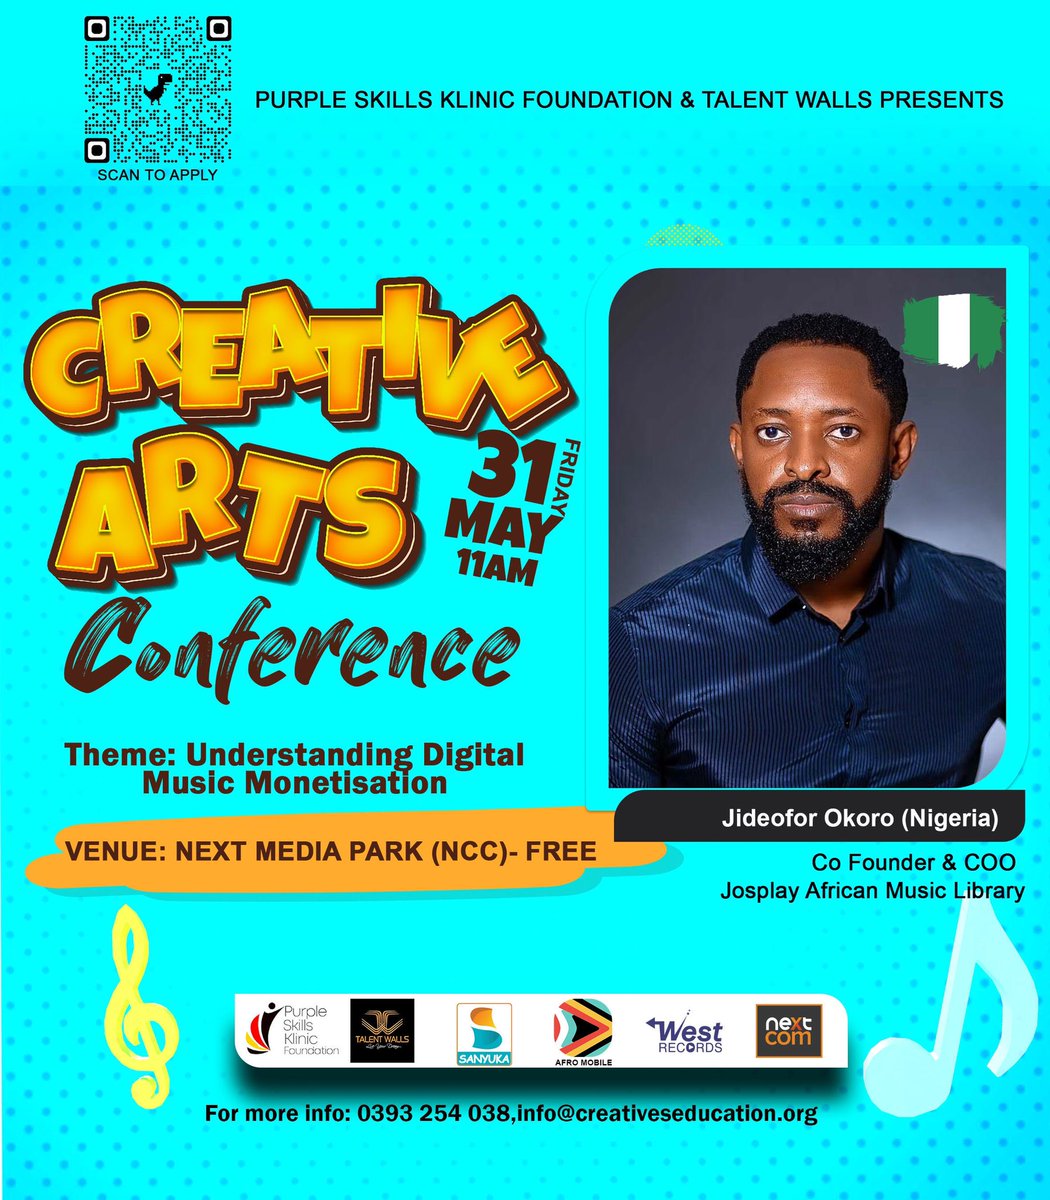 Head of Empire Publishing Munya Chanesta (South Africa), Co Founder Josplay African Music Library Jideofor Okoro (Nigeria) have confirmed participating in the “Creative Arts Conference” Fri 31 May, 11am Live from Next Media. To register forms.gle/FYxK4penGaSJiv…